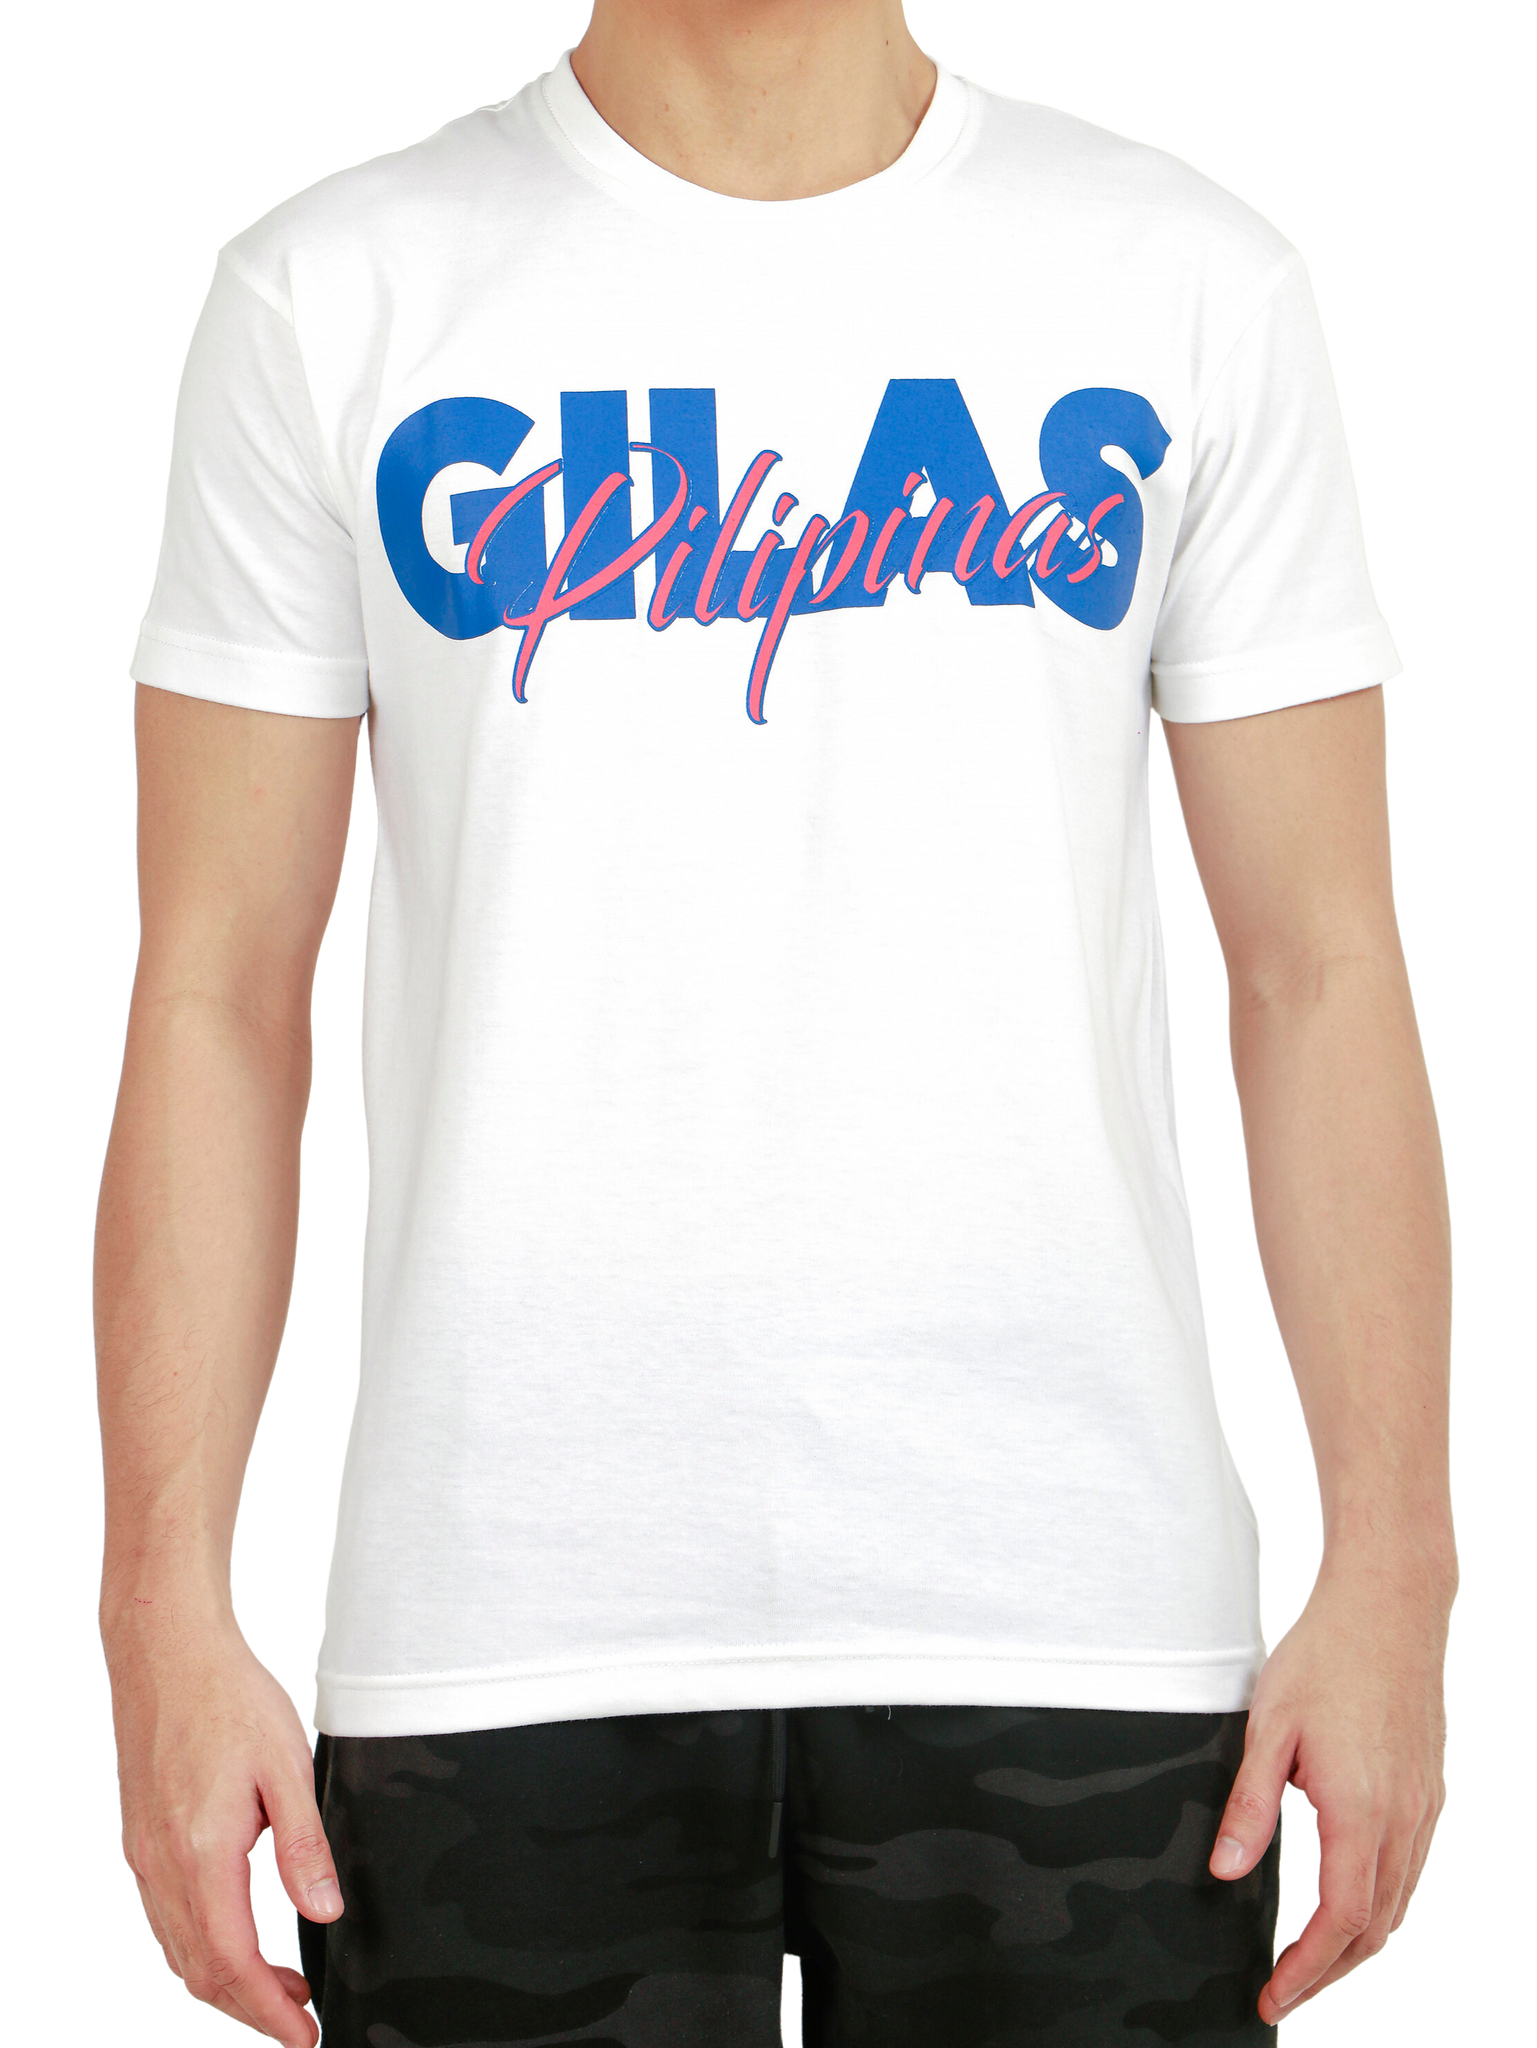 GILAS PILIPINAS in White for Mens